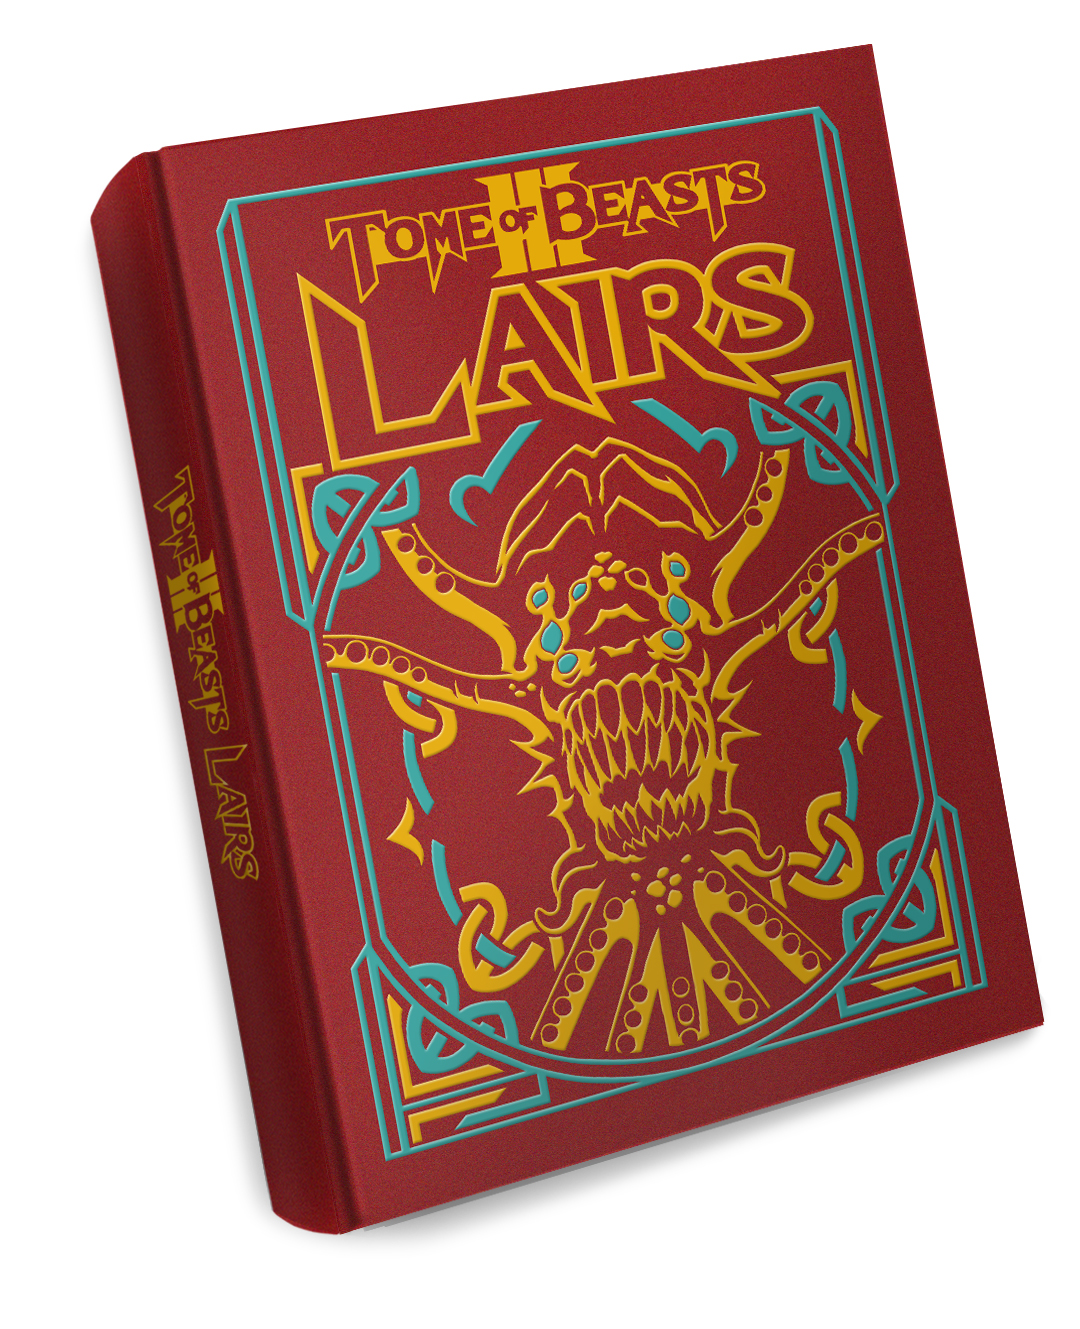 Tome of Beasts 3 Lairs LE 3D Cover FINAL.jpg